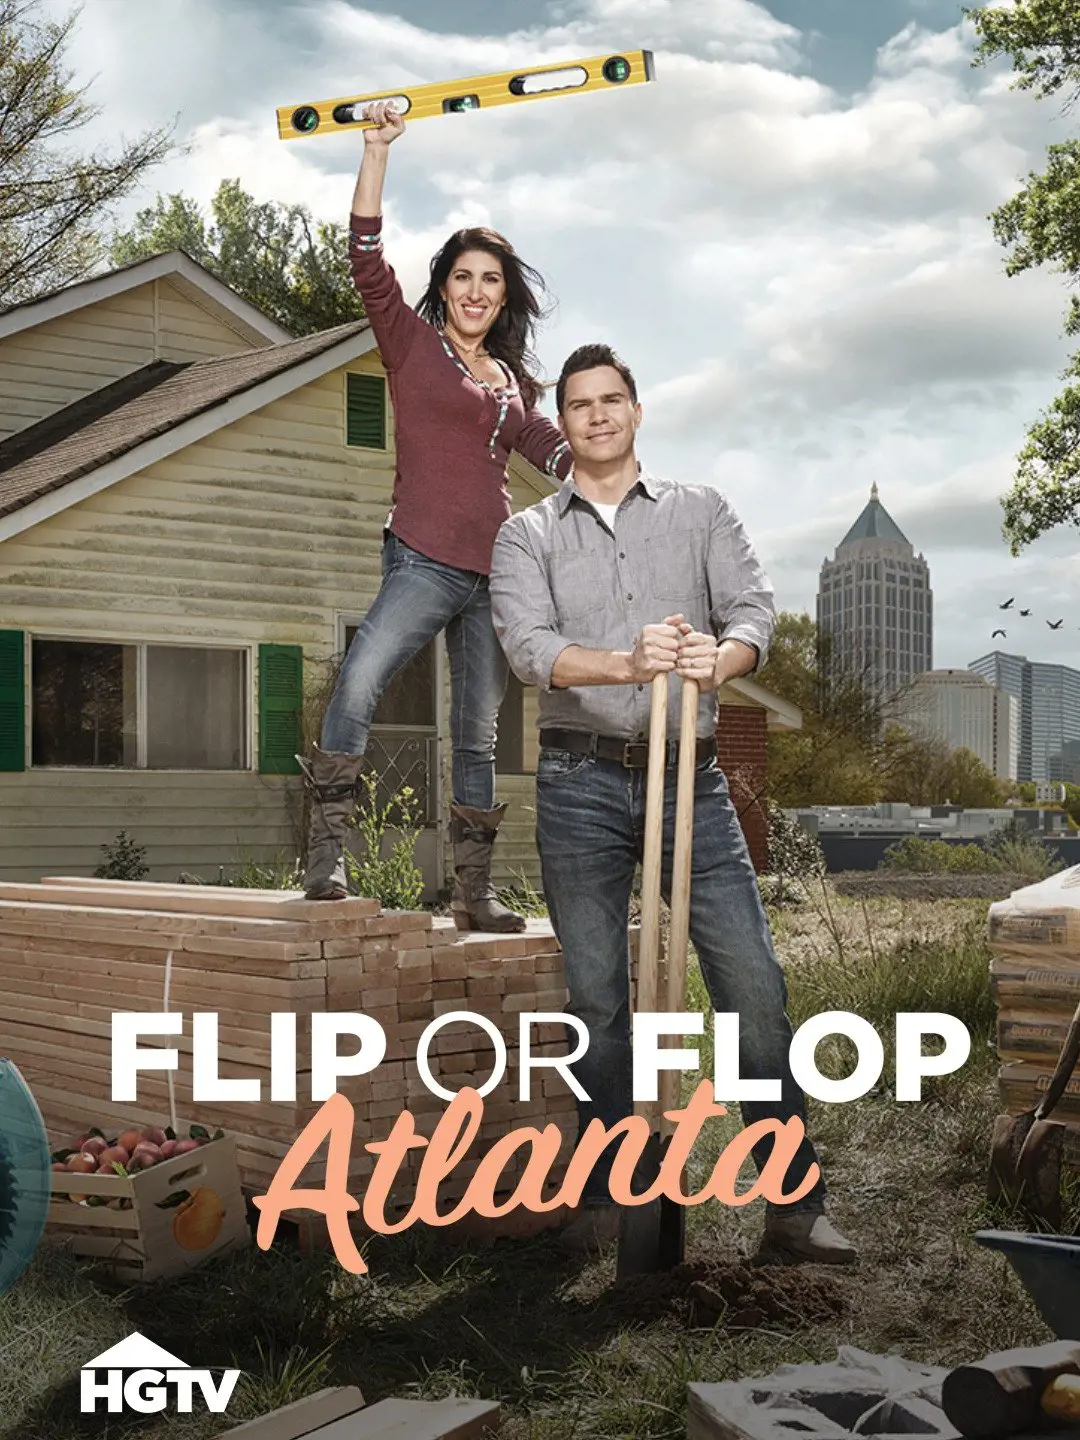 The show is the spin-off series of Flip or Flop.